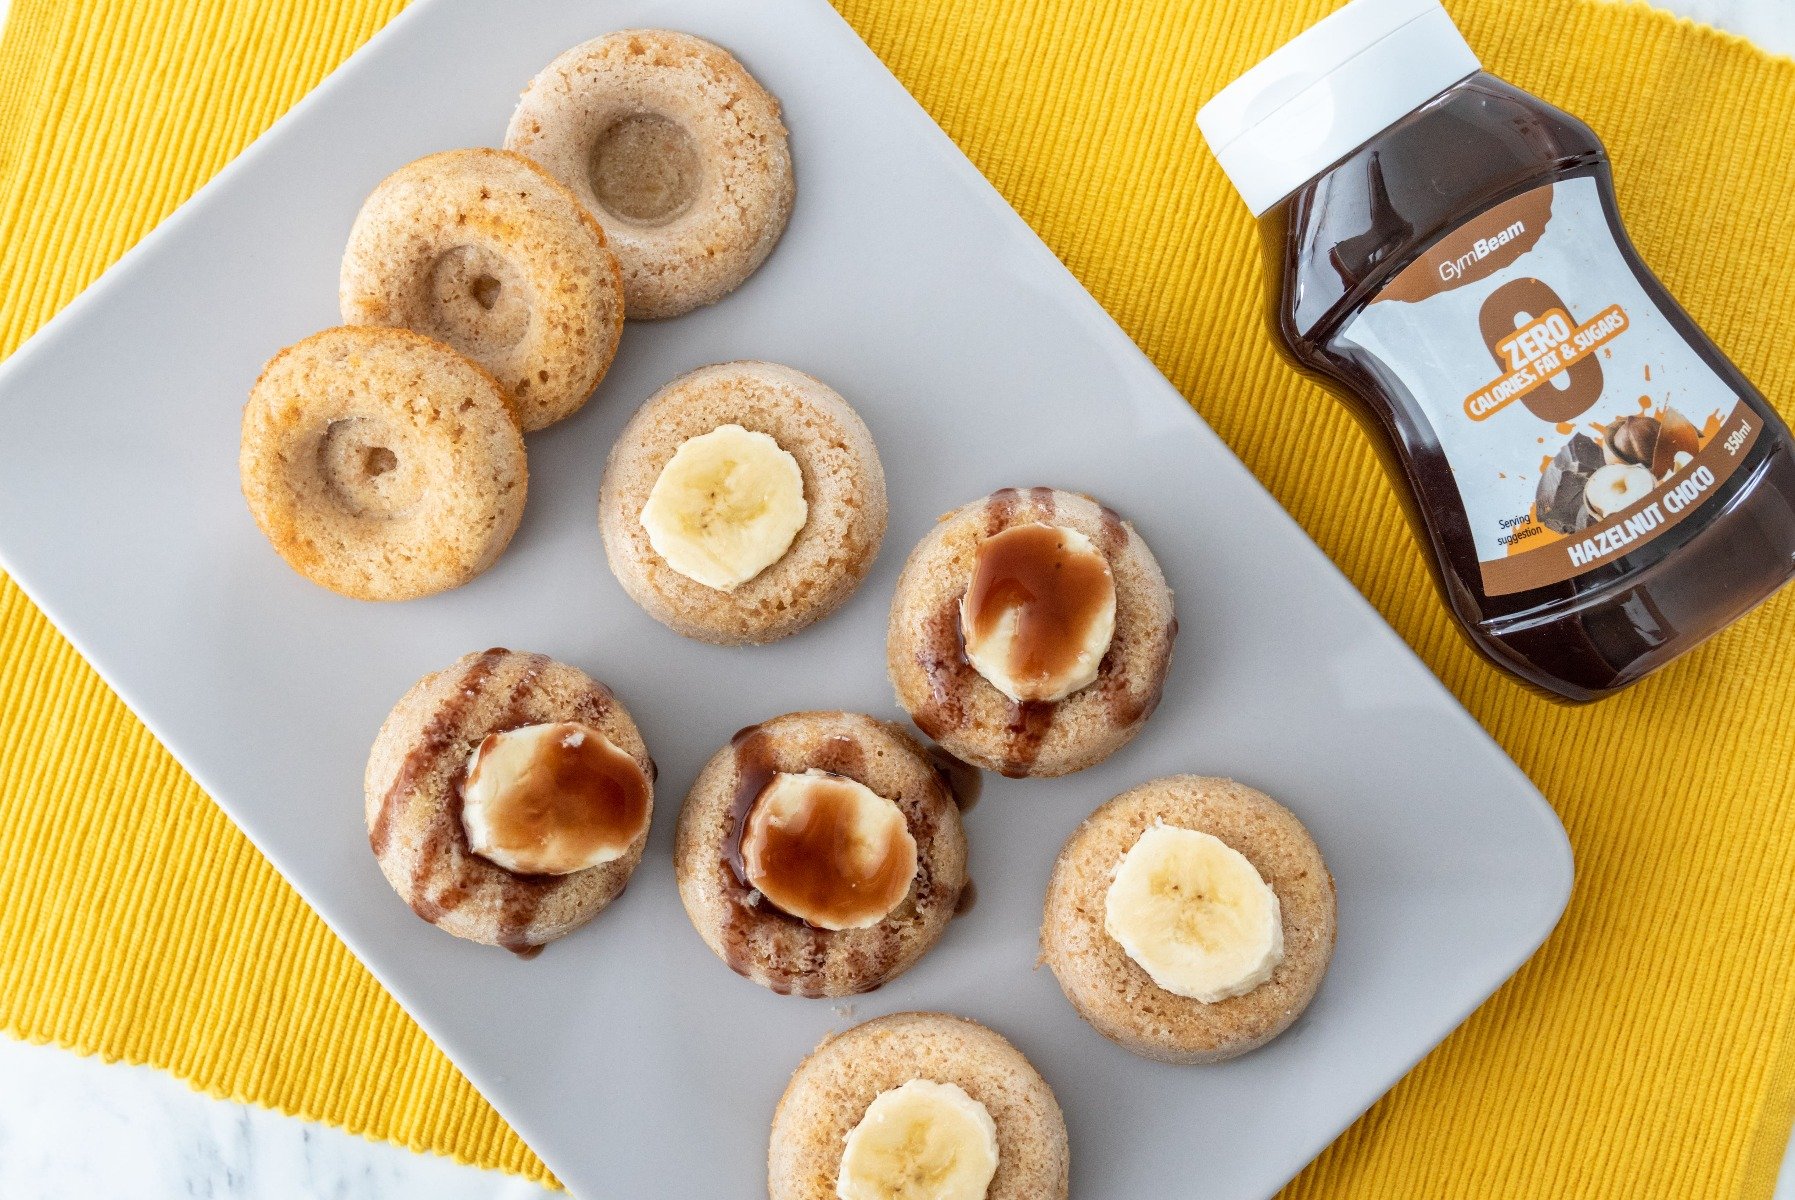 Fitness recipe: Protein doughnuts with banana and chocolate syrup